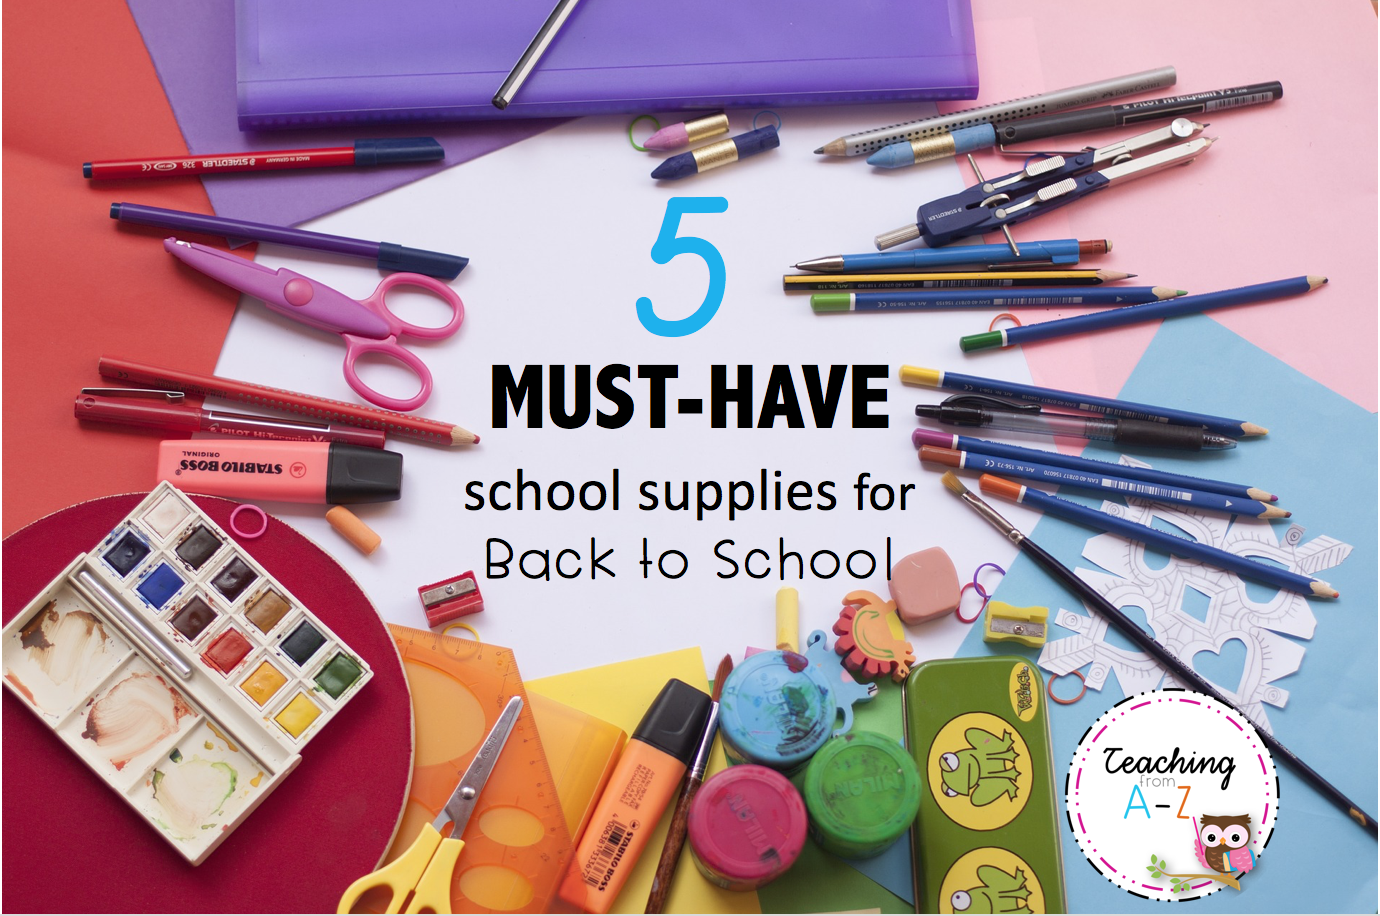 5 MUST-HAVE school supplies for back to school